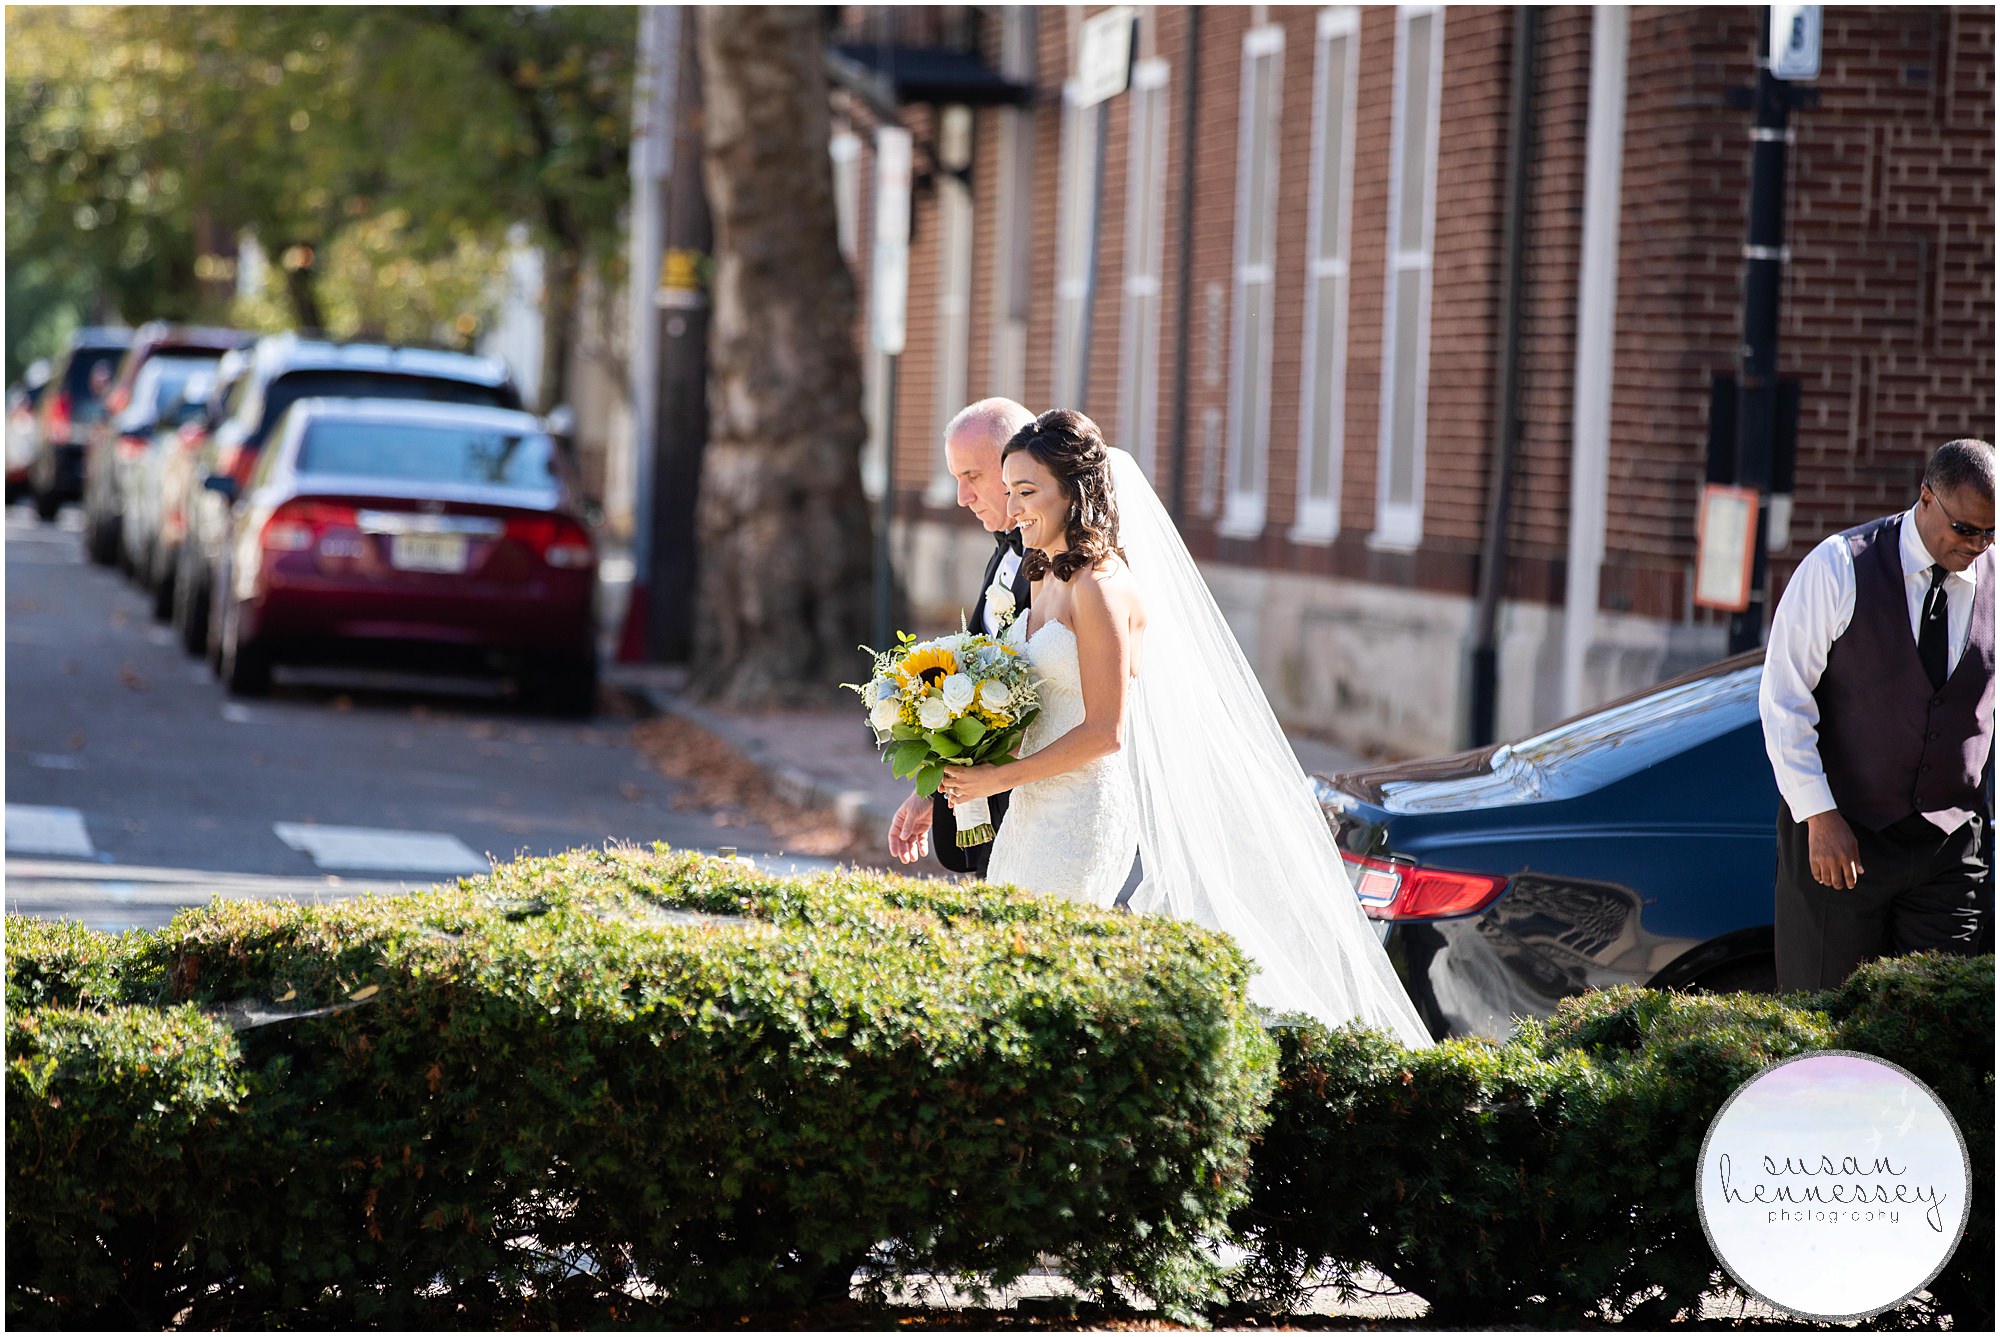 Bride walks to church from sedan with her father